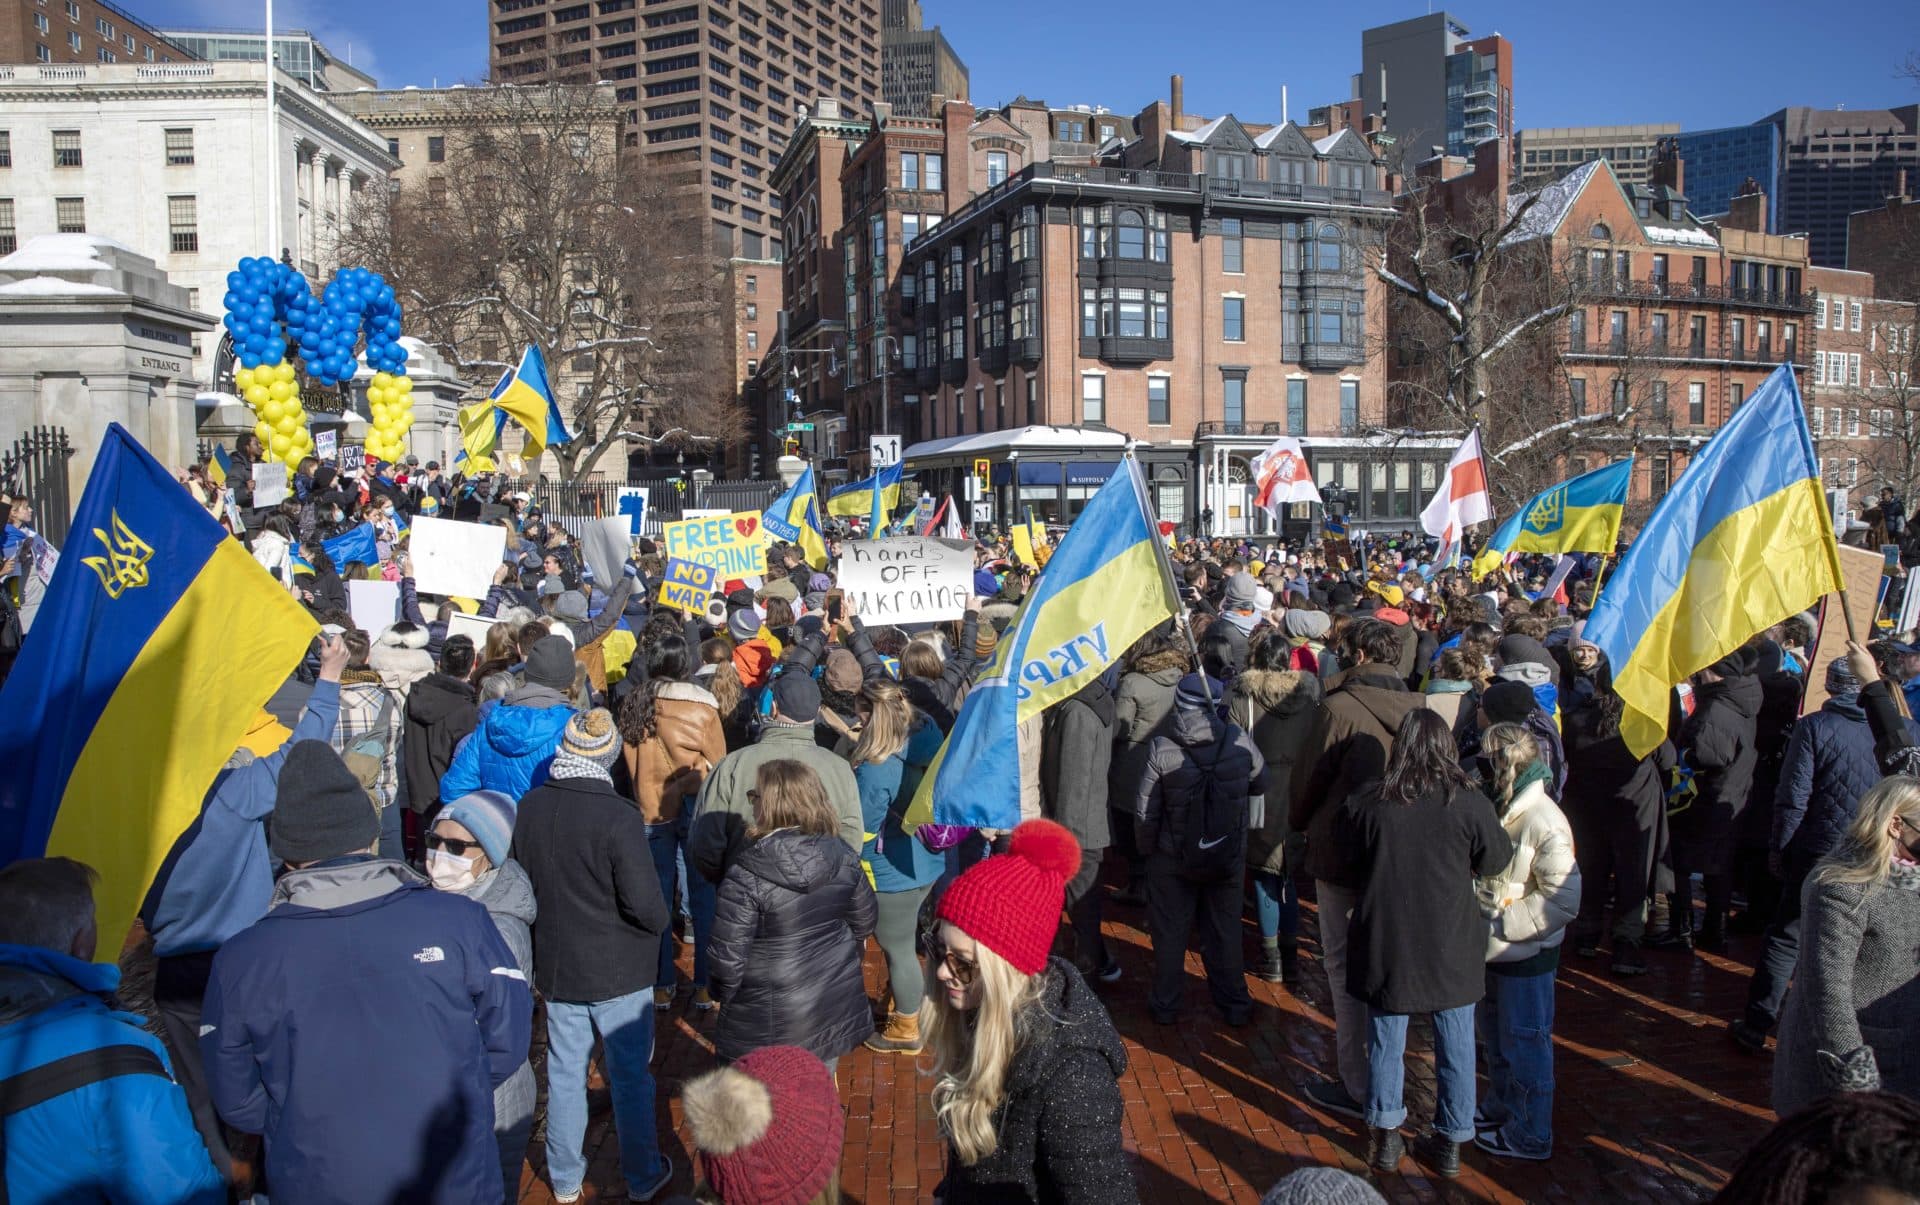 The crowd of demonstrators against the war in Ukraine filled the street in front of the Massachusetts State House, and stretched along Beacon Street and into Boston Common. (Robin Lubbock/WBUR)